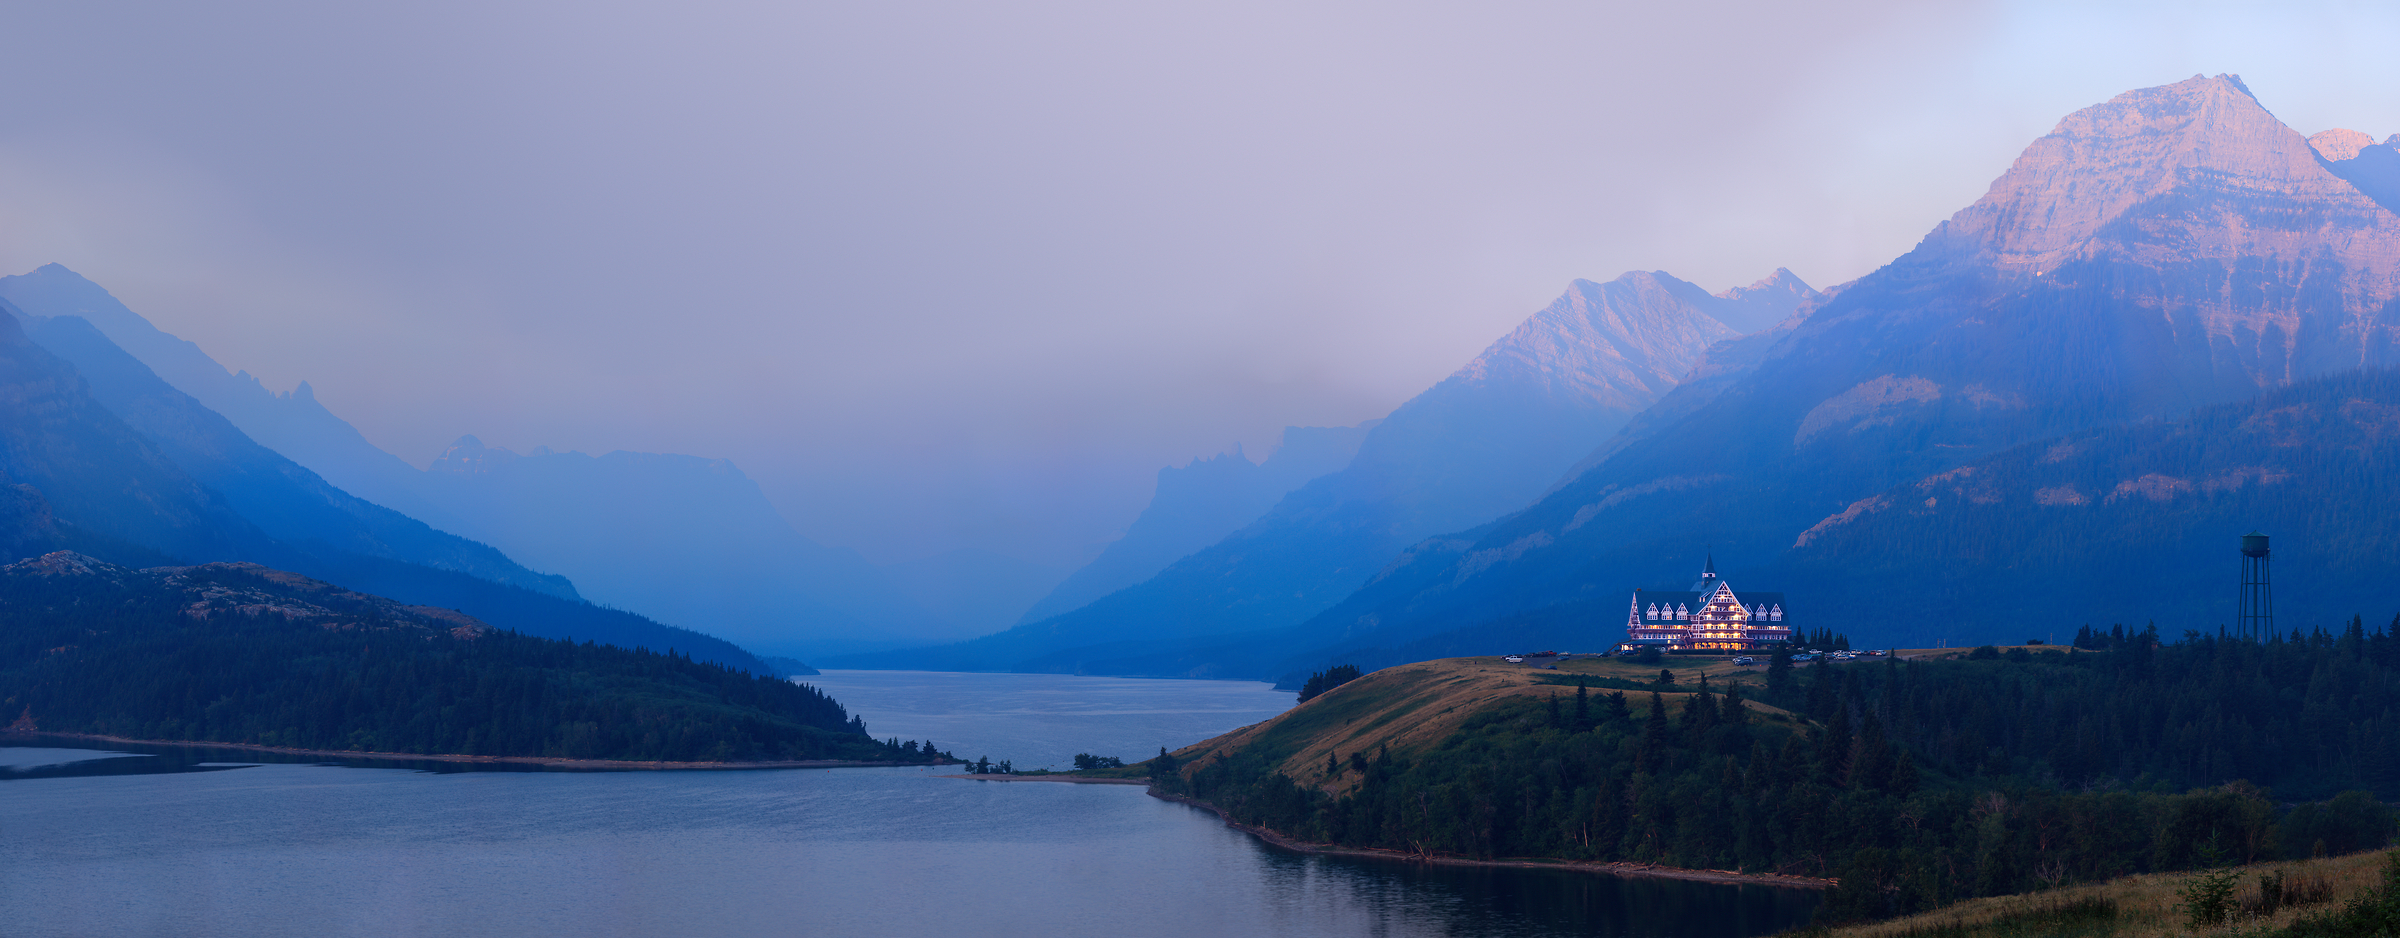 4,650 megapixels! A very high resolution, large-format VAST photo print of the Prince of Wales Hotel in Waterton Lakes National Park with smoke from a wildfire in the valley in the background; fine art landscape photograph created by Scott Dimond in Alberta, Canada